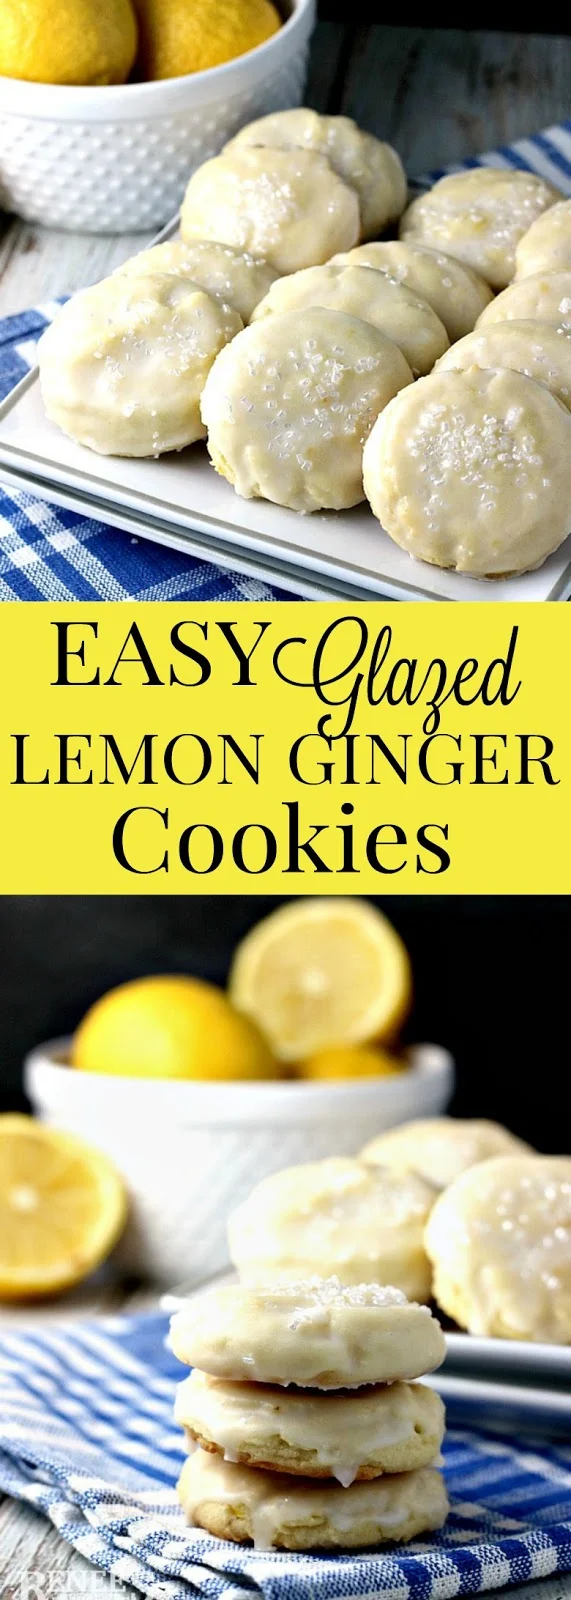 Easy Glazed Lemon Ginger Cookies | Renee's Kitchen Adventures - easy dessert cookie recipe for lemony drop cookies studded with candied ginger and glazed with a lemon icing